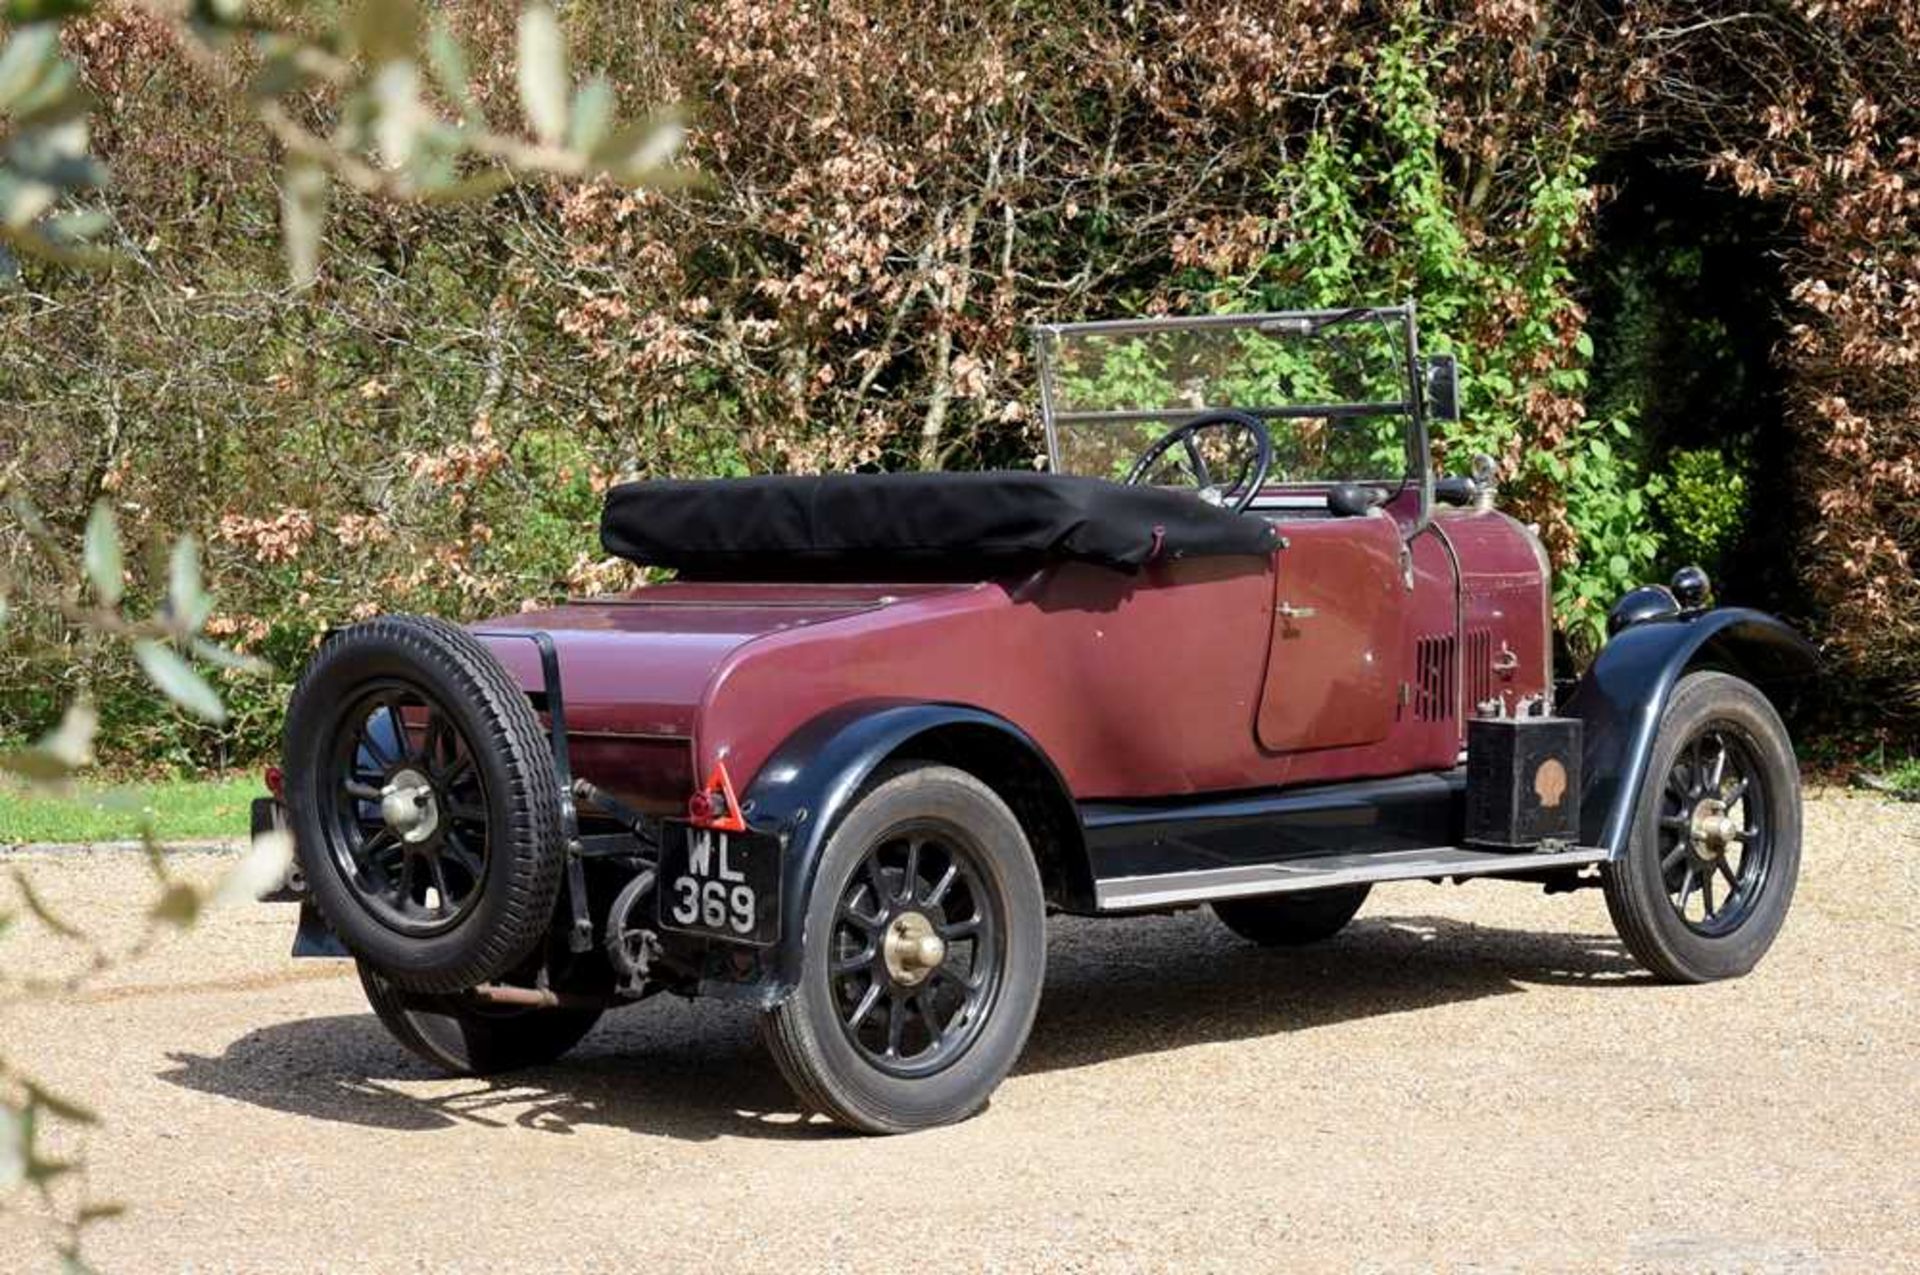 1926 Morris Oxford 'Bullnose' 2-Seat Tourer with Dickey - Image 21 of 99